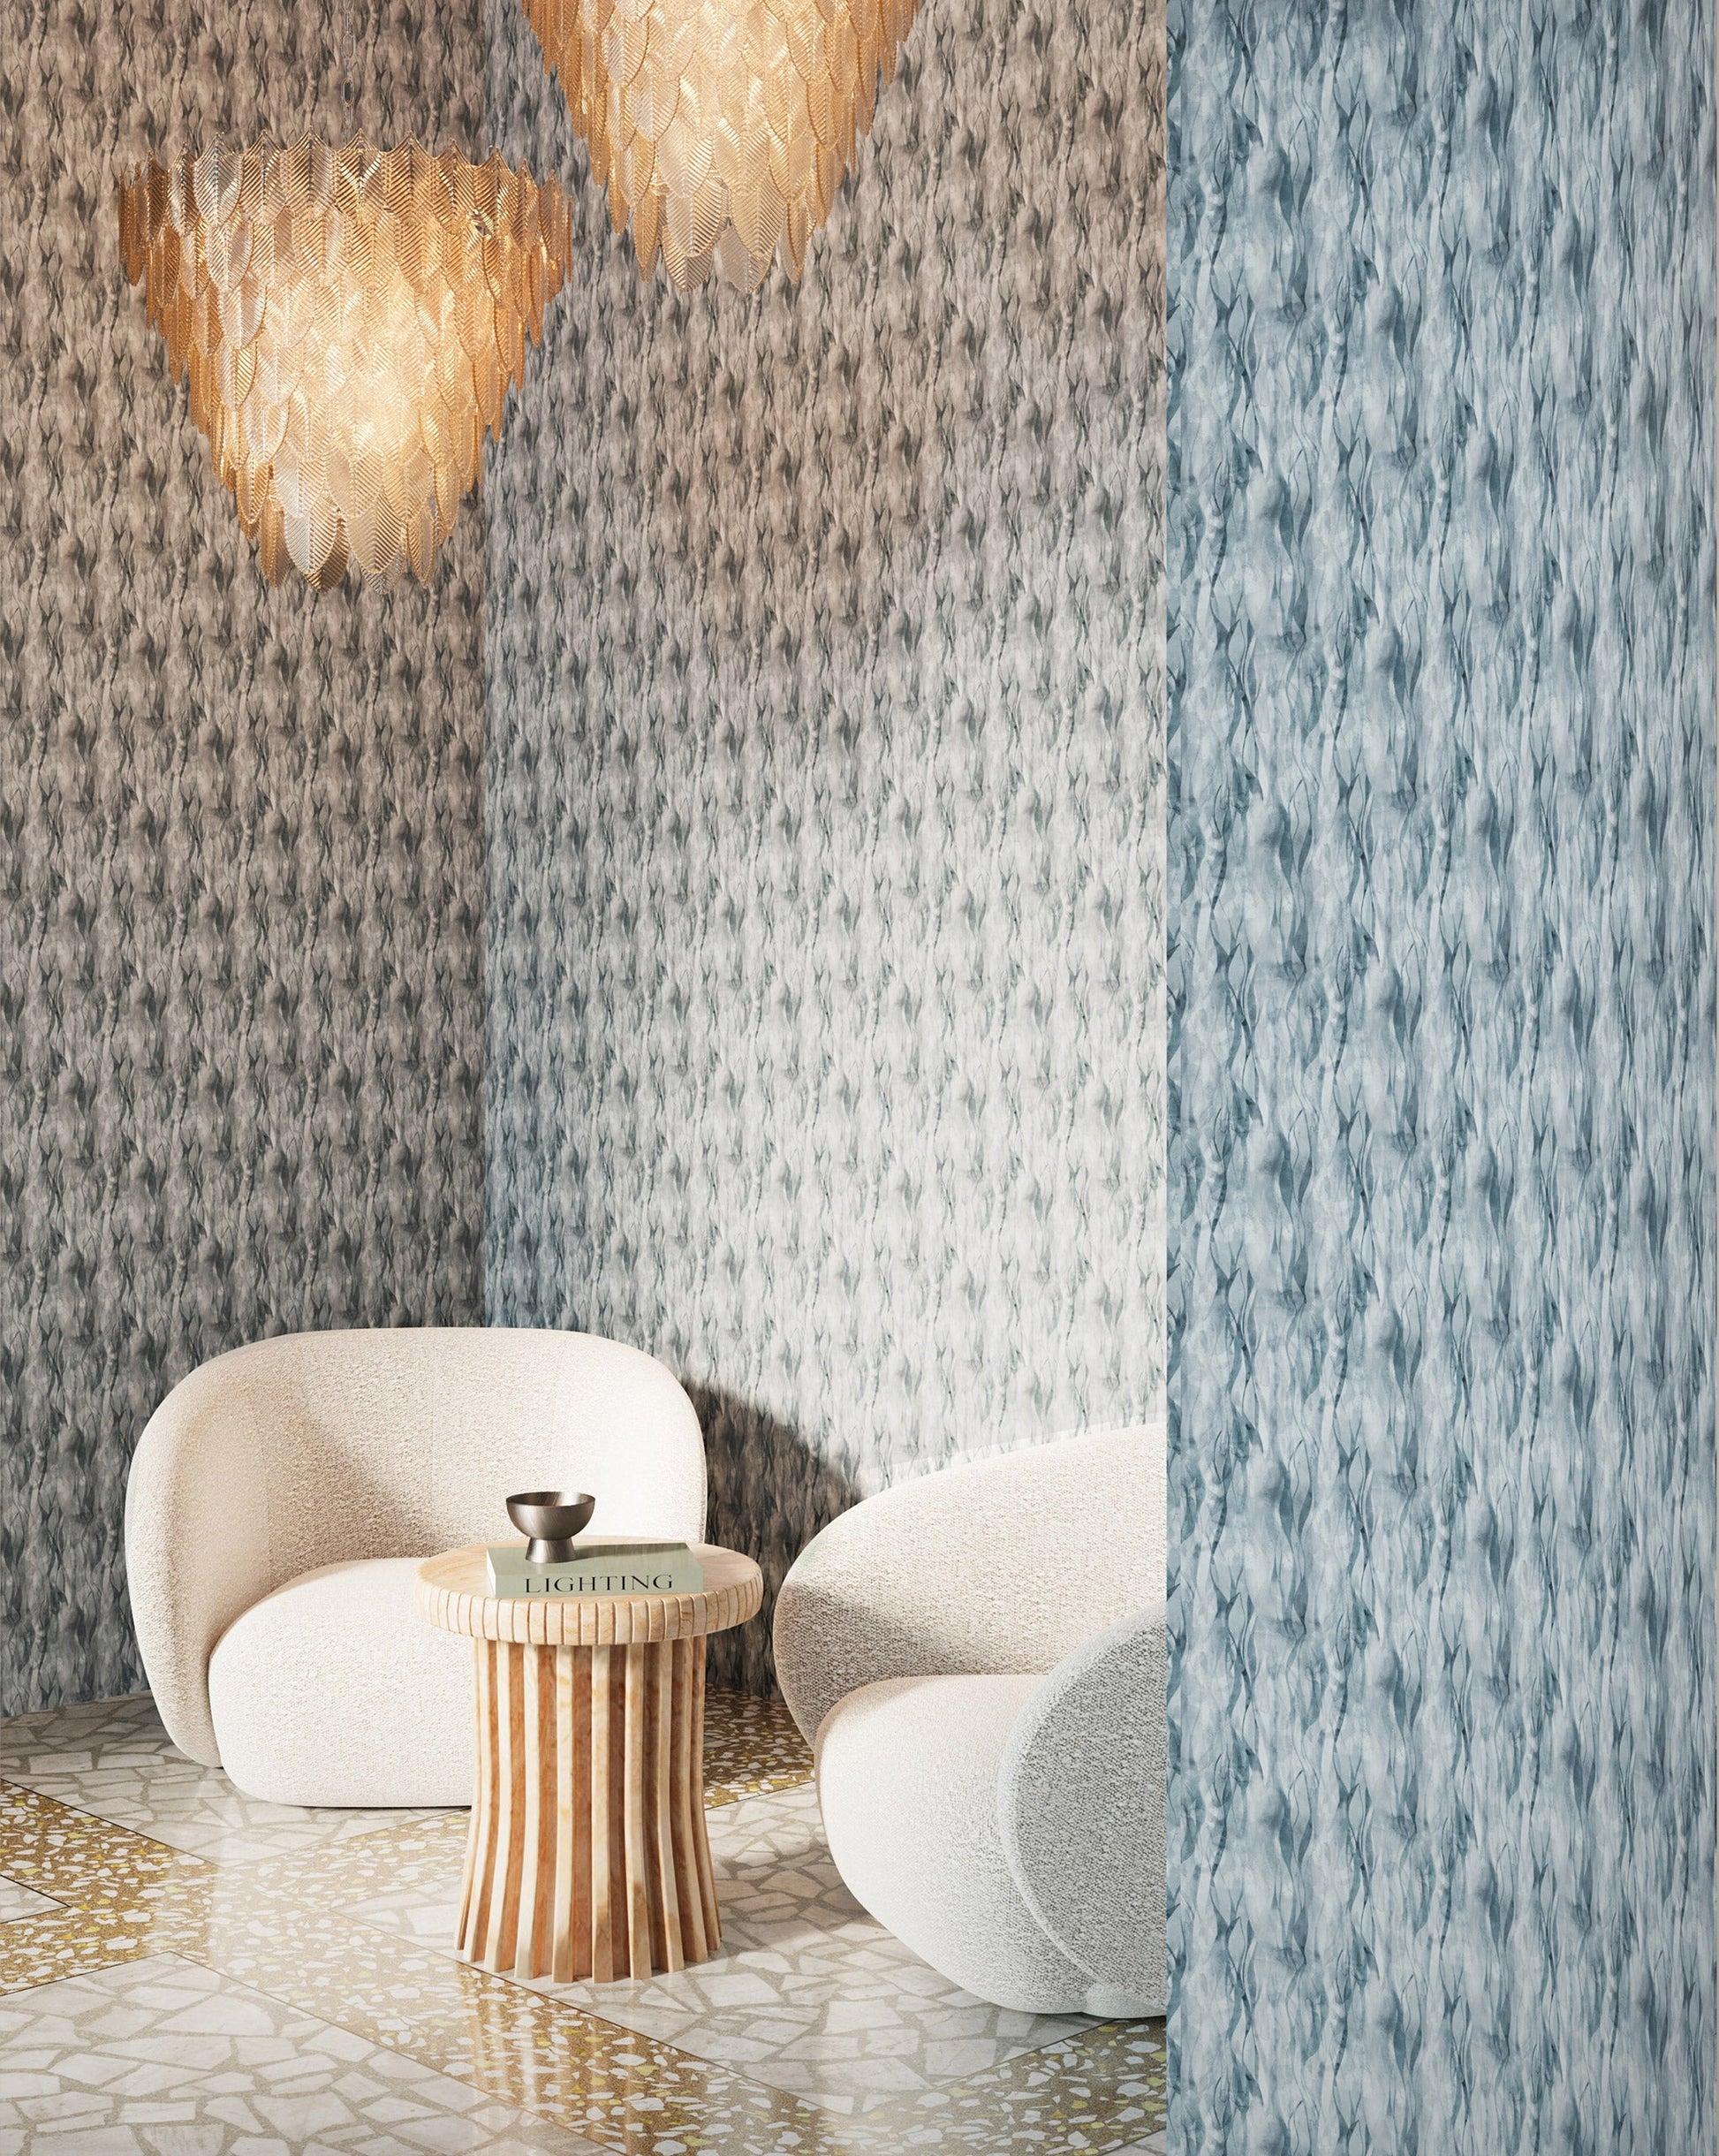 Eskayel's Cascade Lapis wallpaper in blue shades installed in a sitting room.